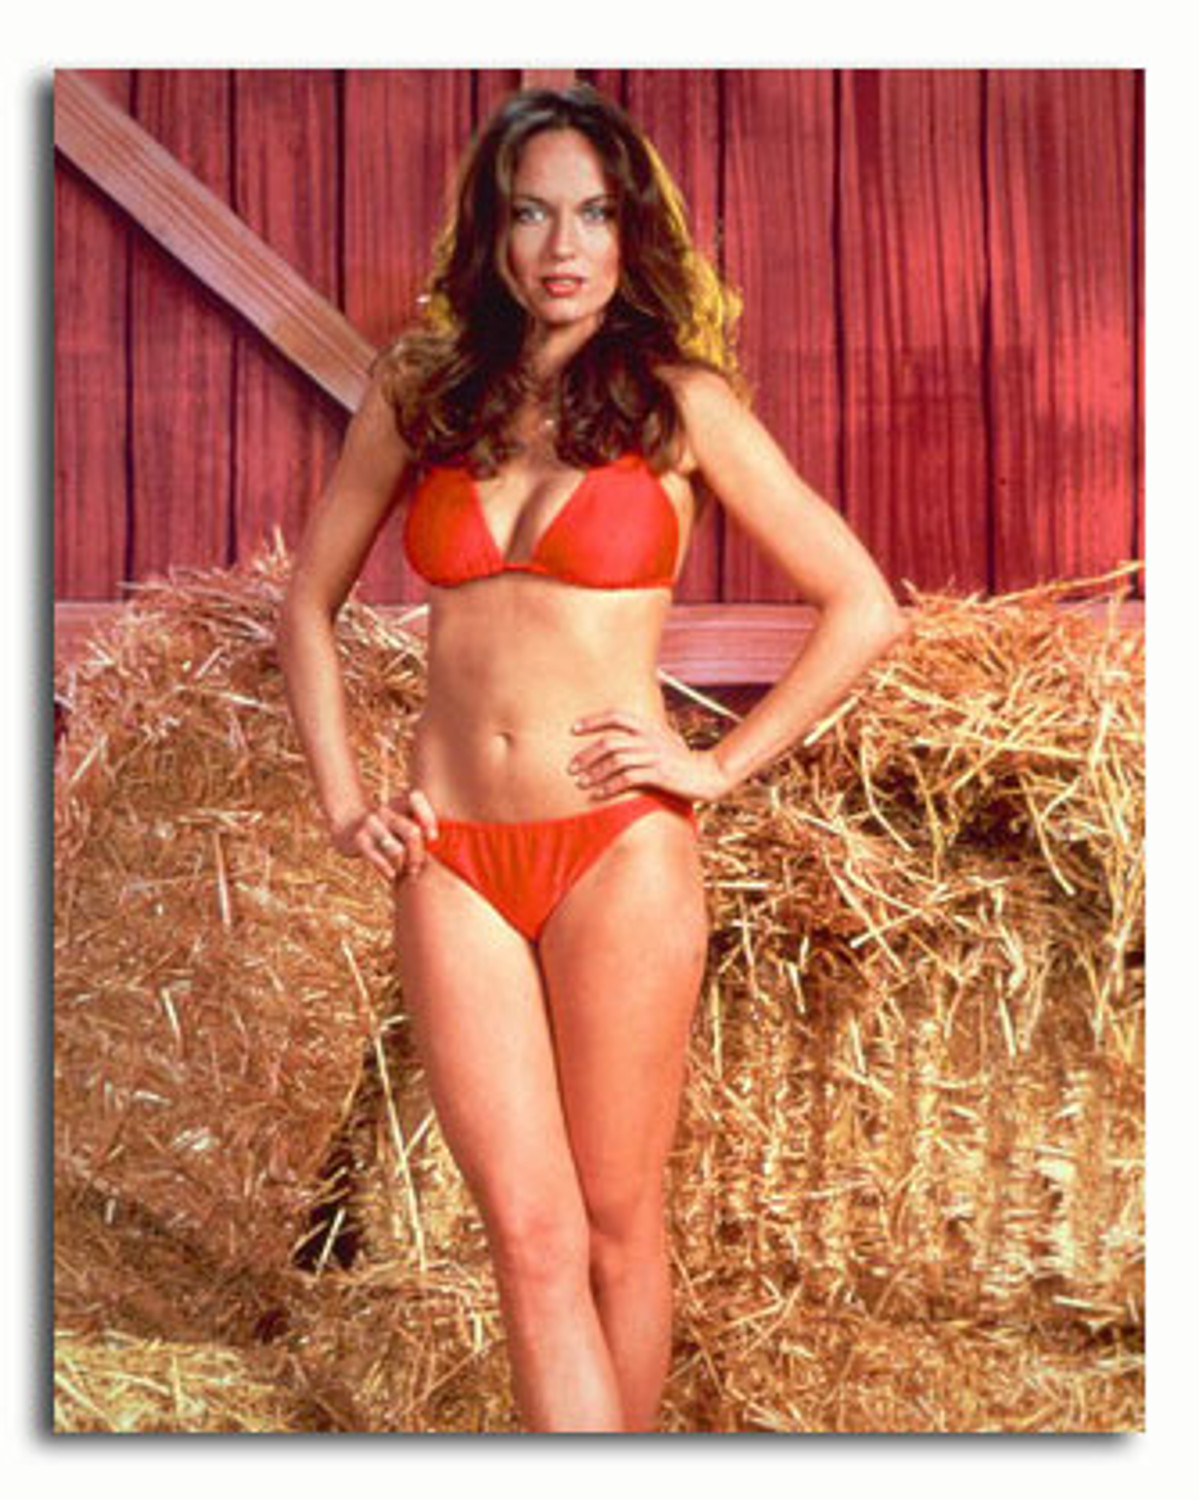 ss3431467_-_photograph_of_catherine_bach_as_daisy_duke_from_the_dukes_of_hazzard_available_in_4_sizes_framed_or_unframed_buy_now_at_starstills__41943__78786.1394500005.jpg